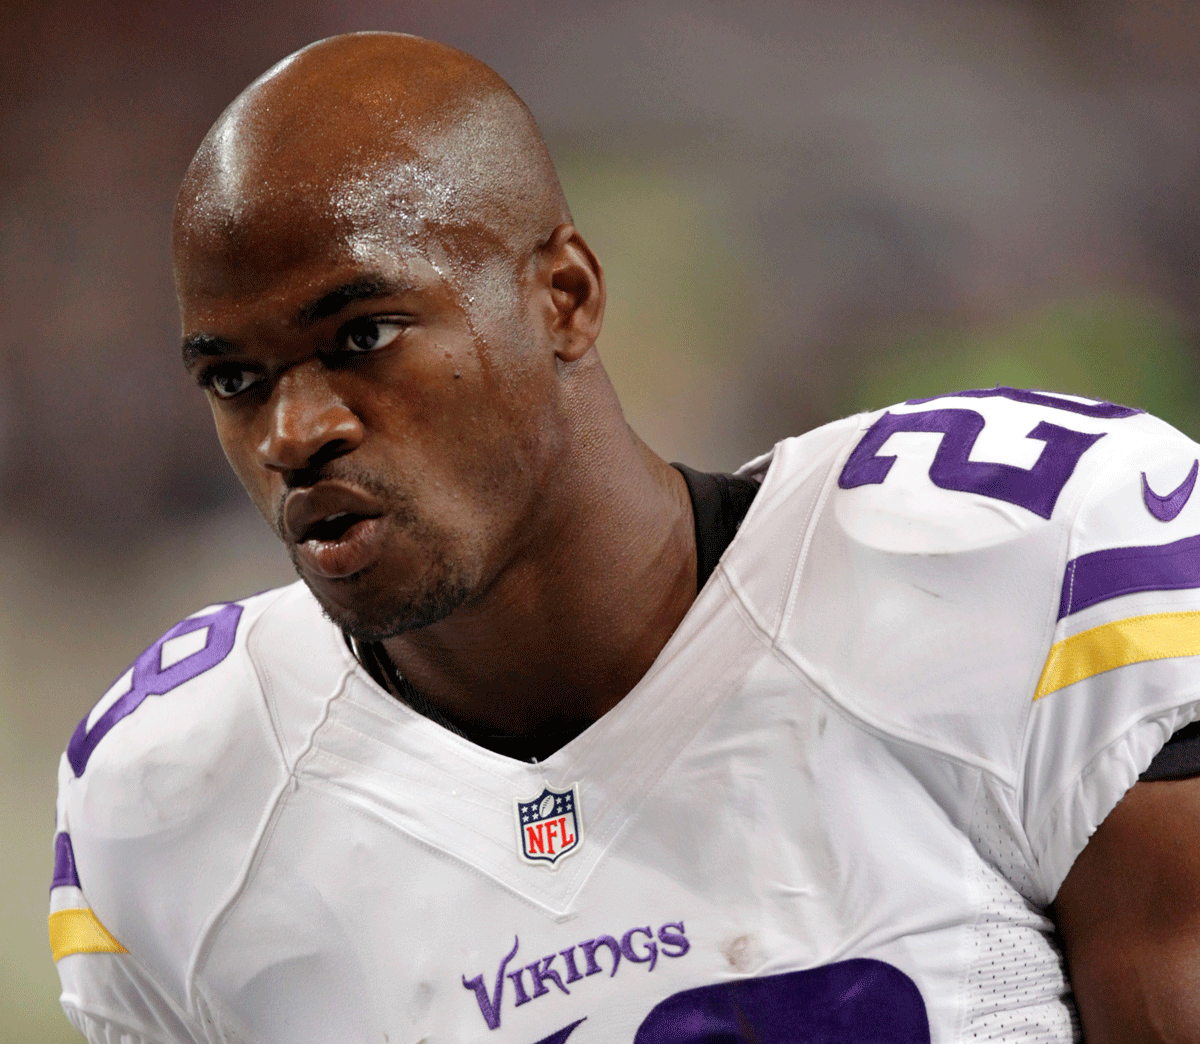 Report: Vikings’ Adrian Peterson turns himself into police